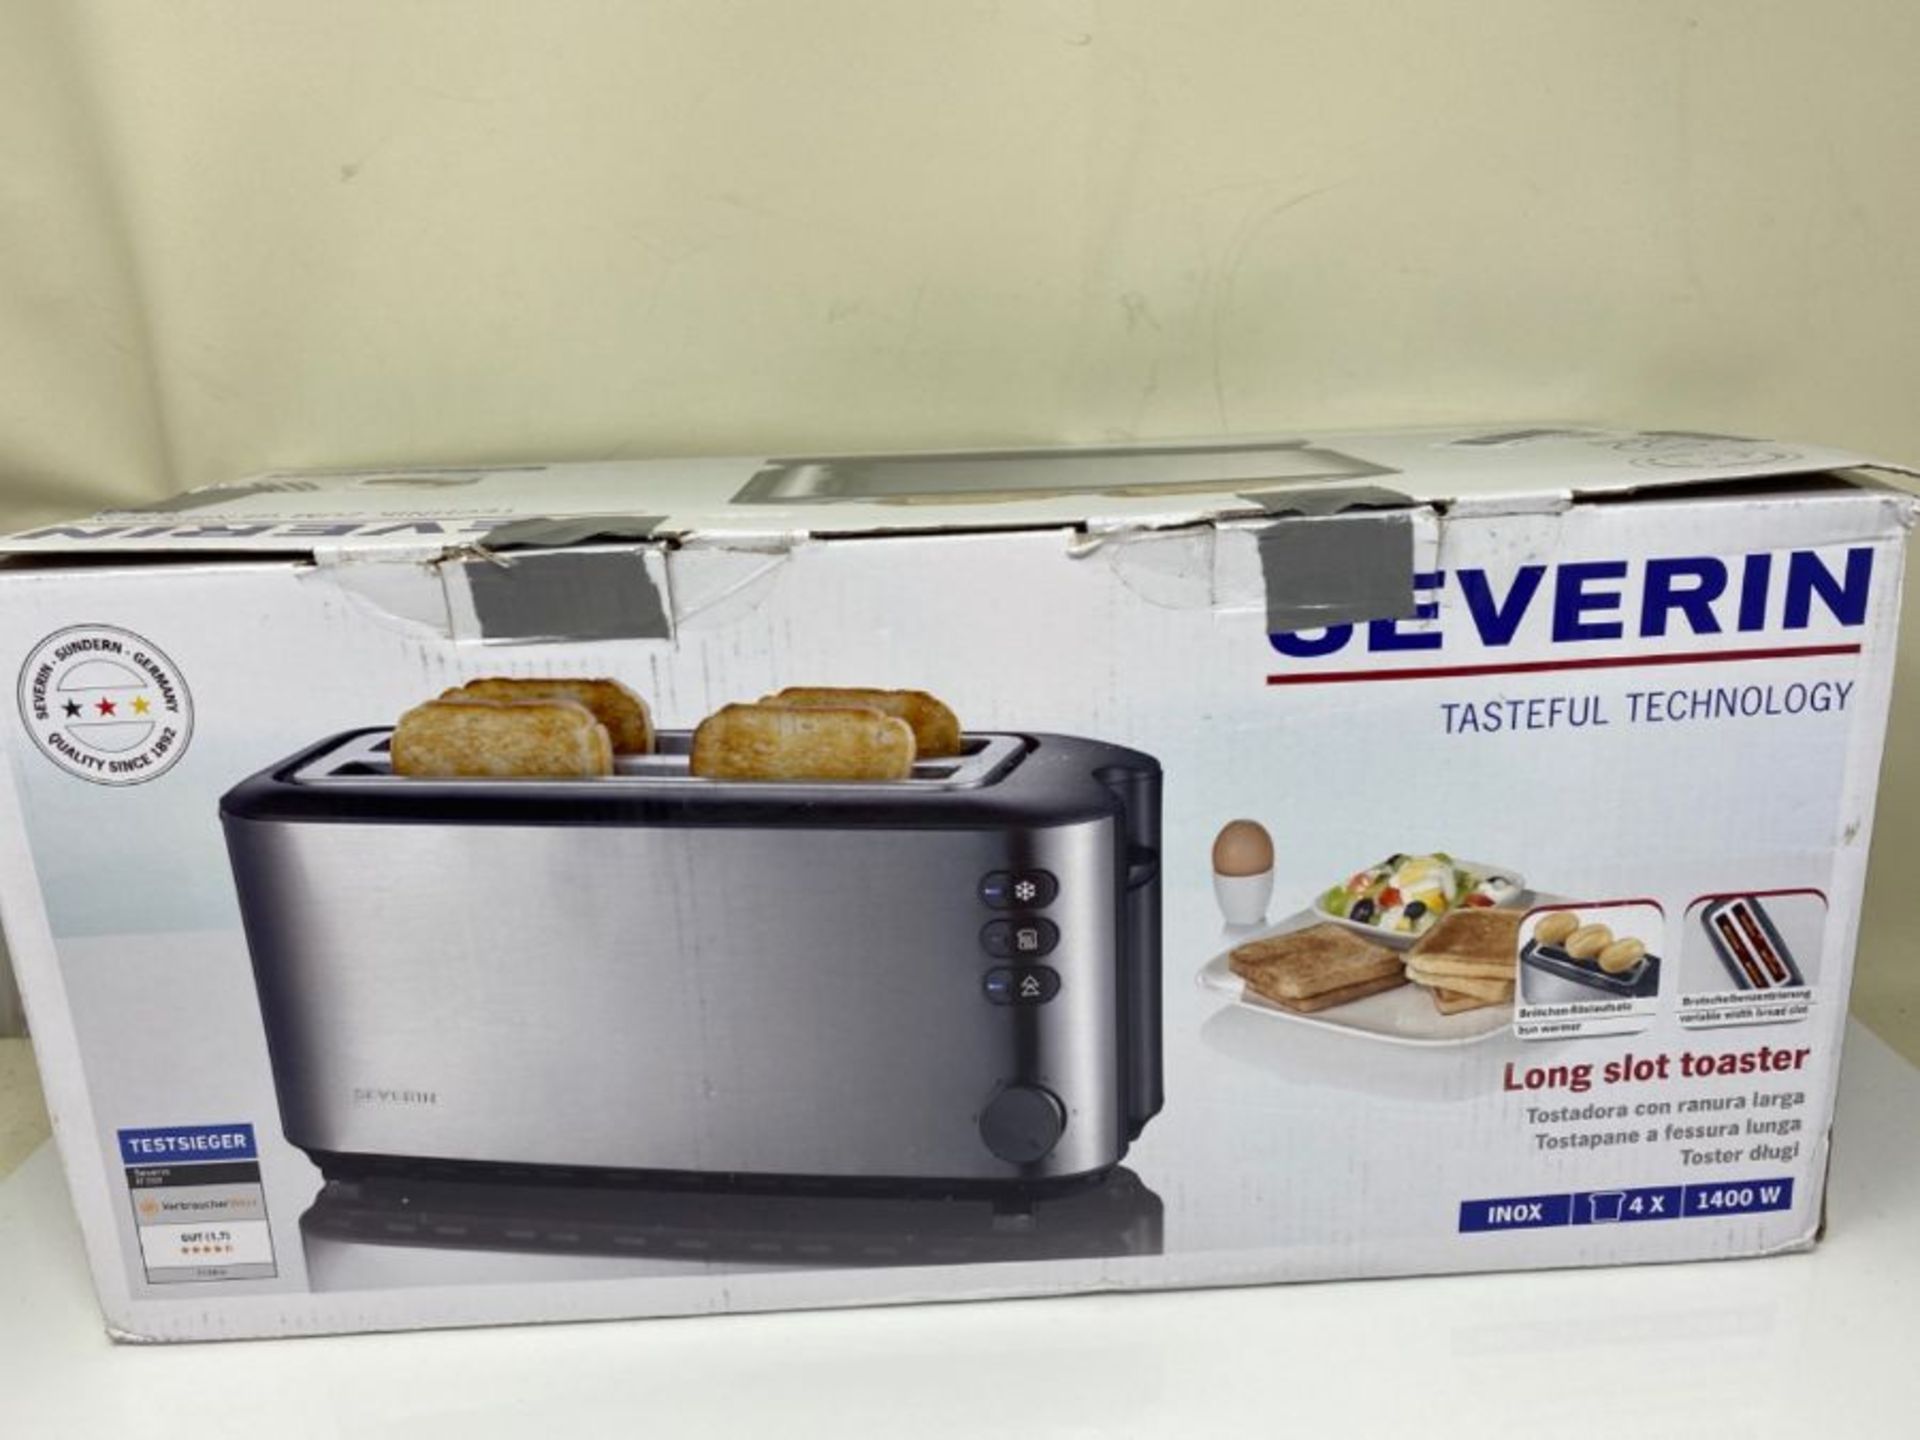 Severin 2509 Automatic 4-Slice Long Slot Toaster, 1400 W, Stainless Steel-Black Chambe - Image 2 of 3